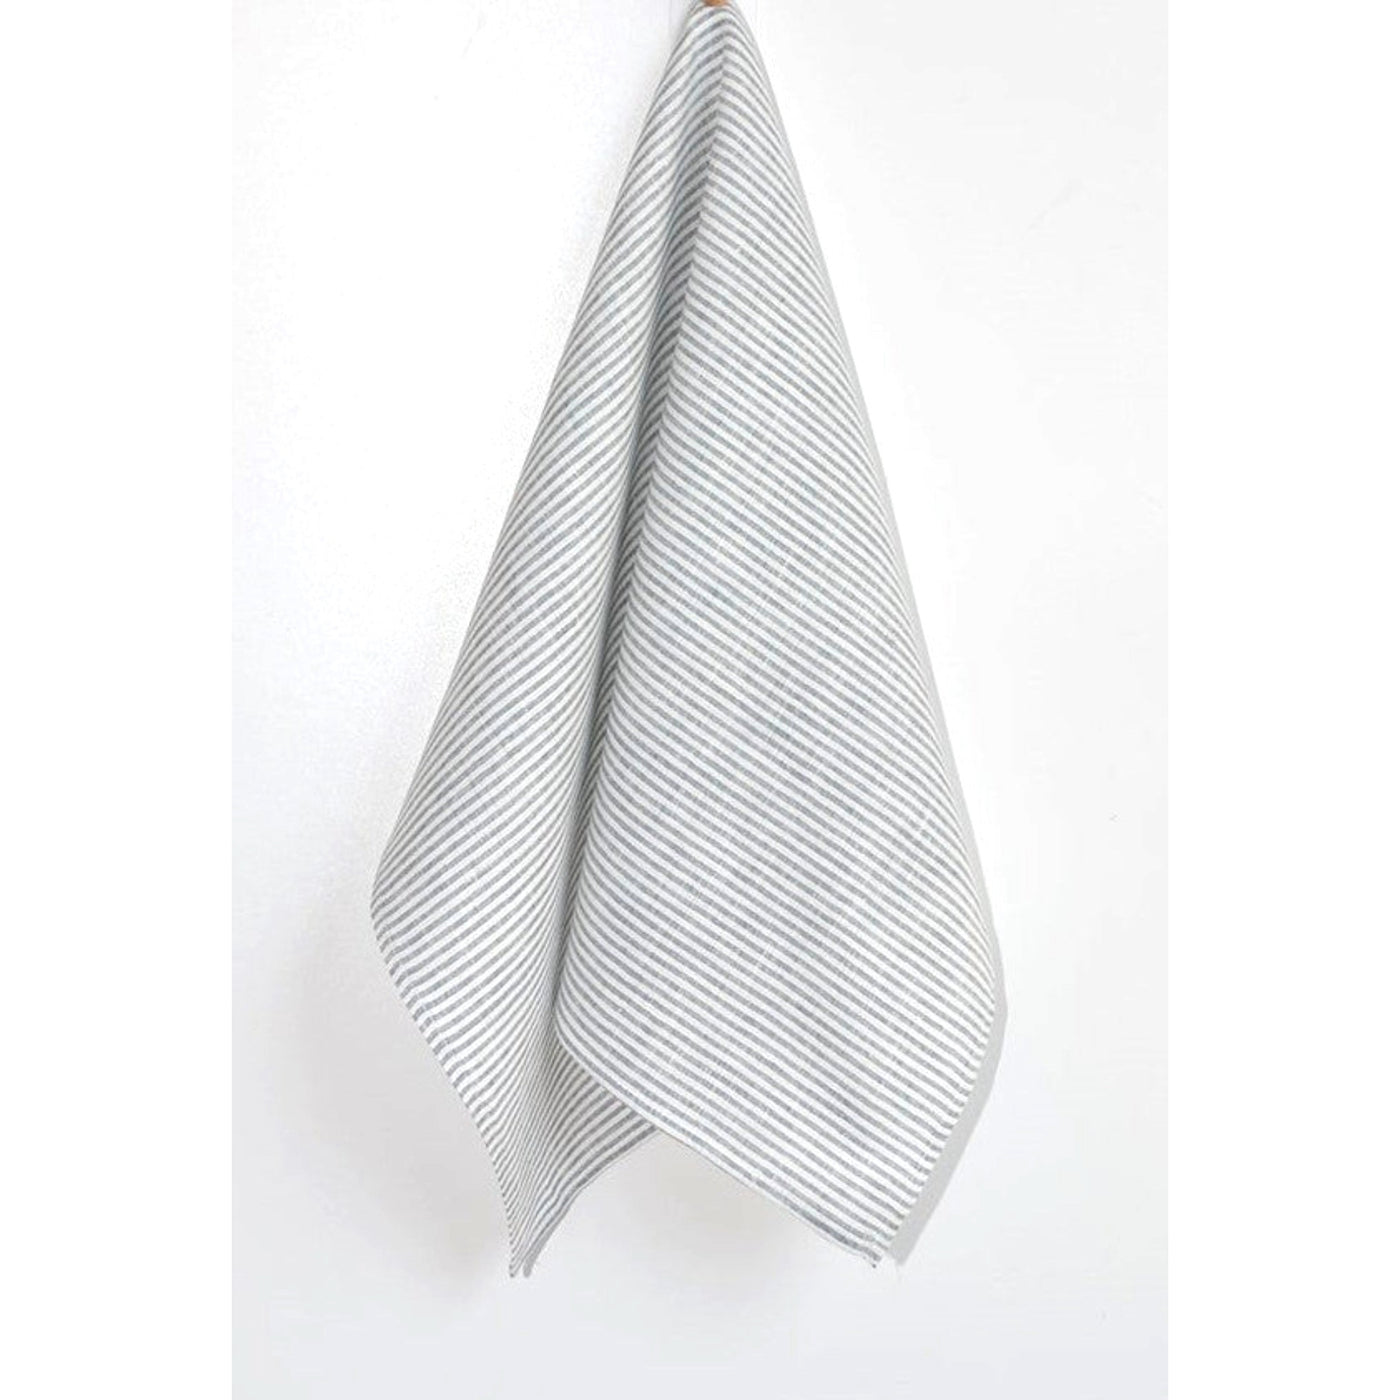 French Striped Linen Tea Towel: 20"x28" - At Avalon Willow Home